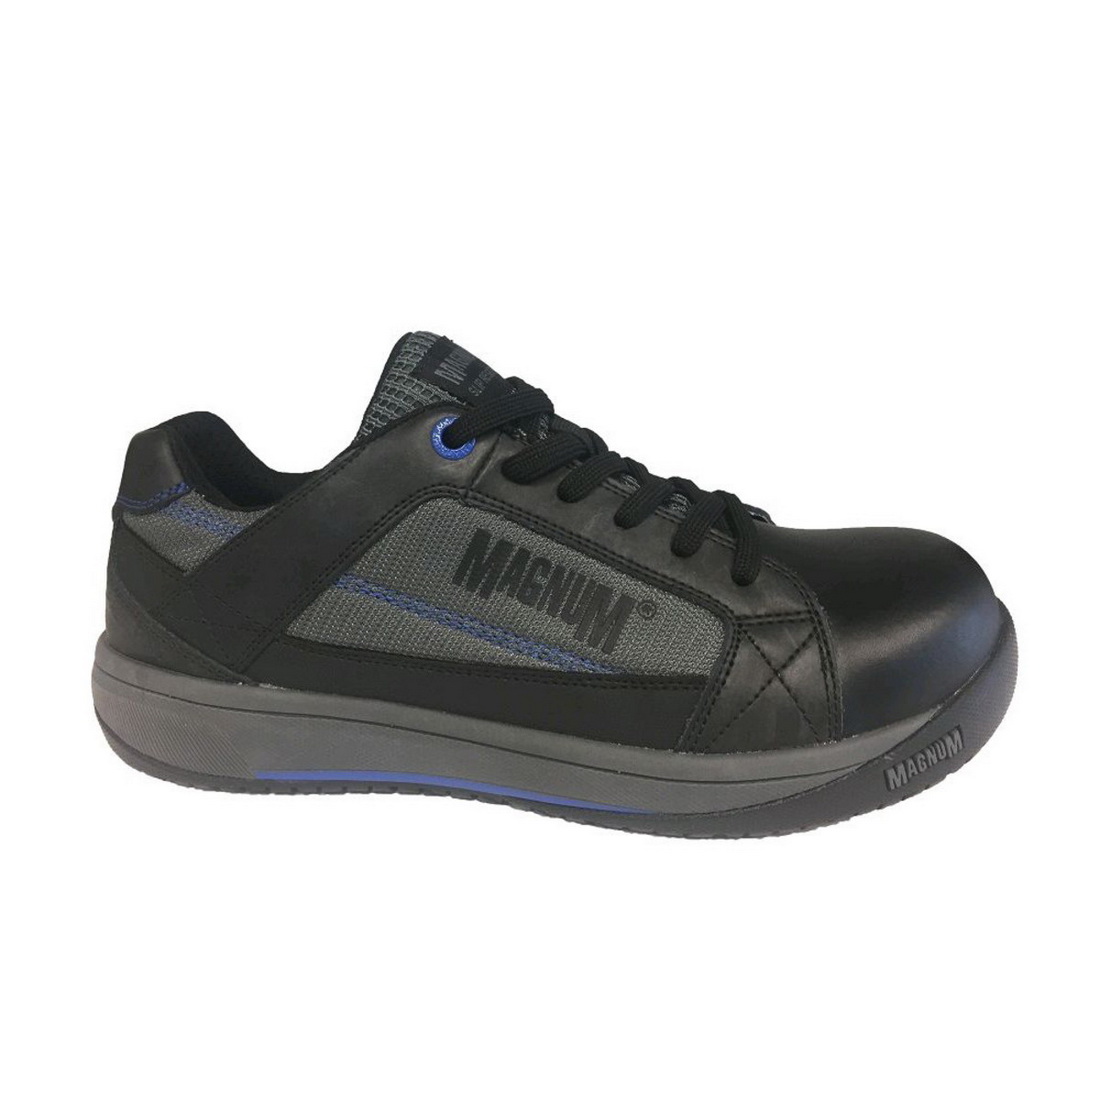 Mags Low Leather CTi Anti-Static Safety Shoes Black/Blue Size 10 ...